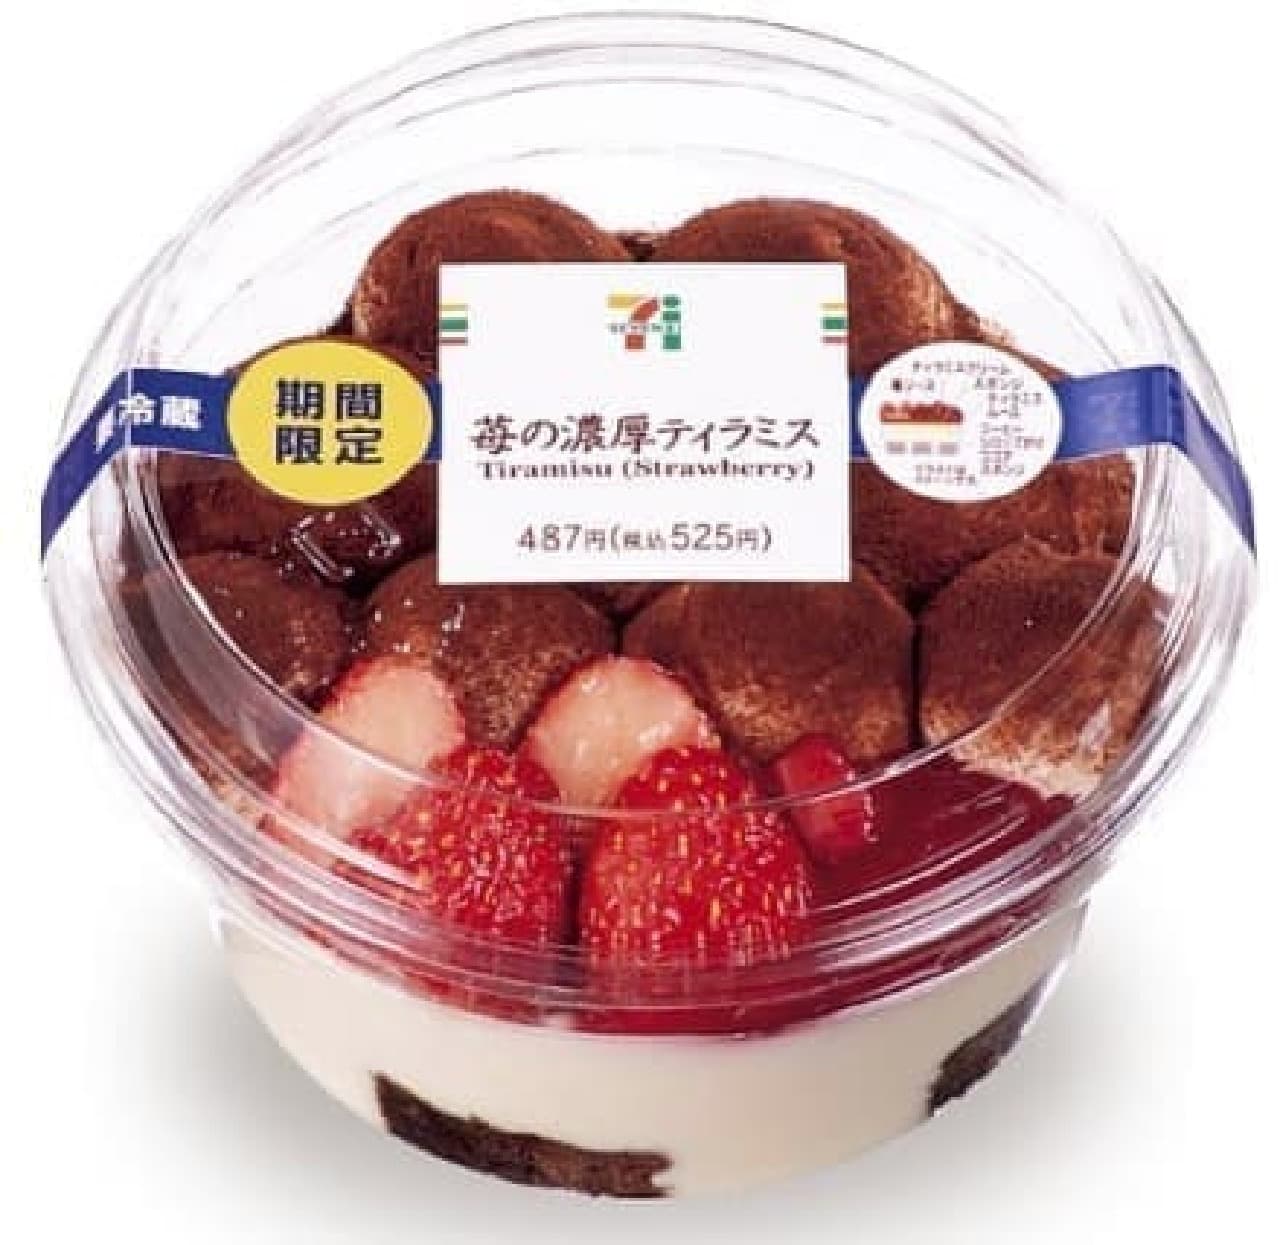 7-ELEVEN's end-of-month limited share sweets "Strawberry rich tiramisu"